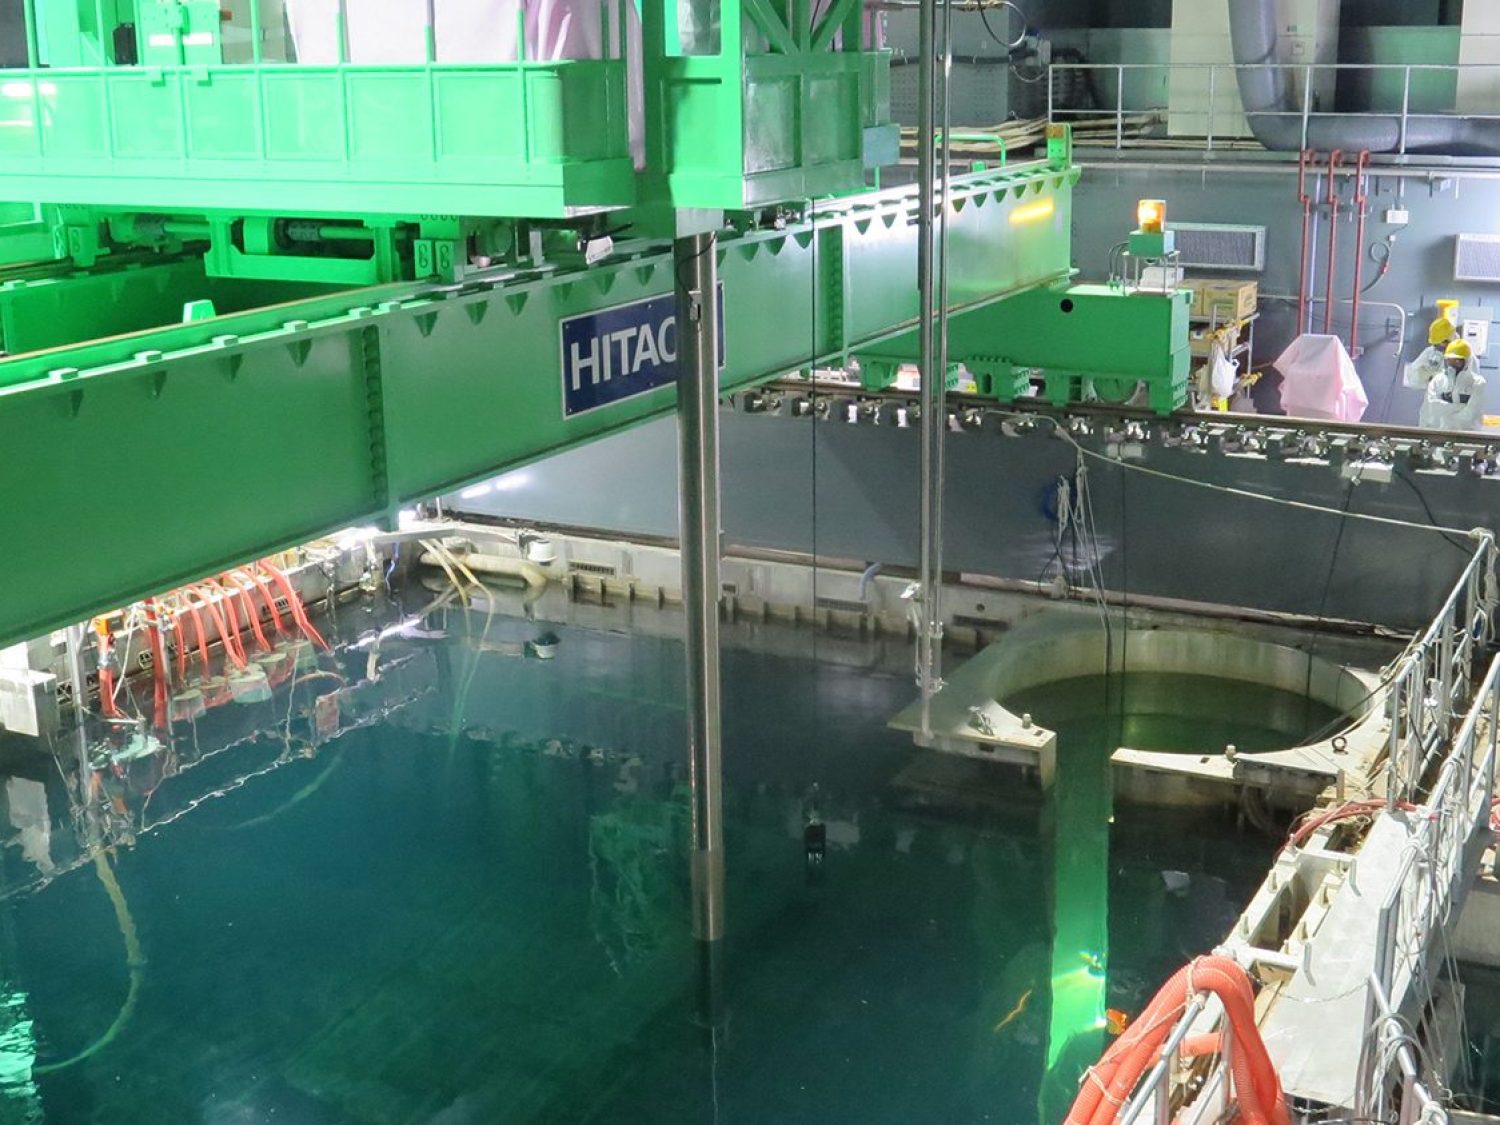 In this handout image provided by Tokyo Electric Power Co, workers remove nuclear fuel rods from a pool at No. 4 reactor of the Fukushima Daiichi Nuclear Power Plant on November 18, 2013 in Okuma, Fukushima, Japan. TEPCO started removing nuclear fuel from a damaged reactor building for the first time, marking a new stage in the decades-long decommissioning process. The operation to empty the storage pool in the No. 4 reactor building, which holds 1,533 nuclear fuel assemblies, began and expected to be removed by December 2014. But the overall decommissioning work at the stricken nuclear plant is expected to take 30 to 40 years to complete. (Tokyo Electric Power Co via Getty Images)